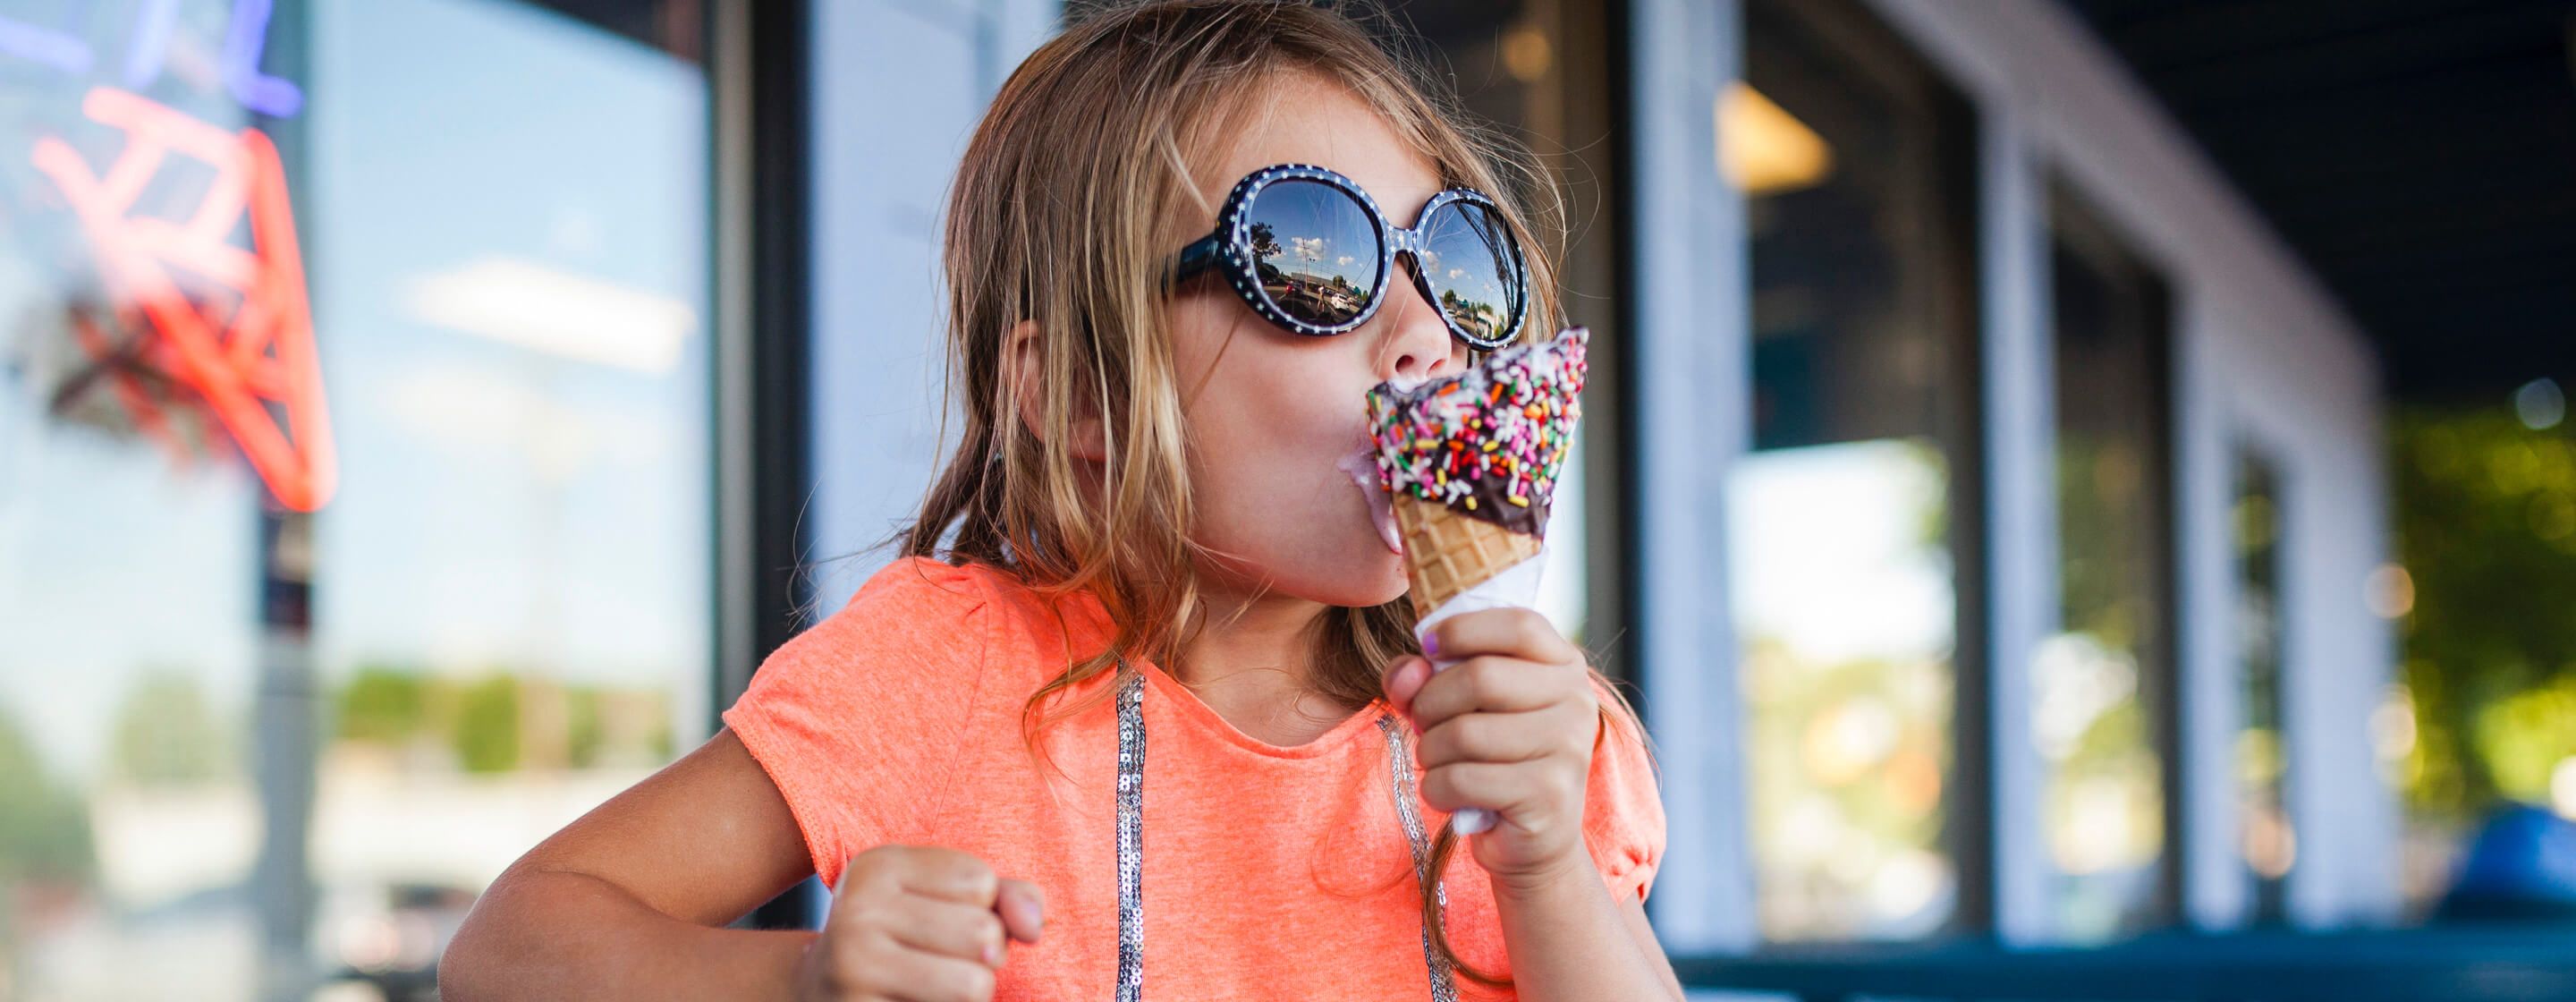 Young girl in sunglasses eating a chocolate and sprinkles-covered ice cream cone in front of an ice cream shop